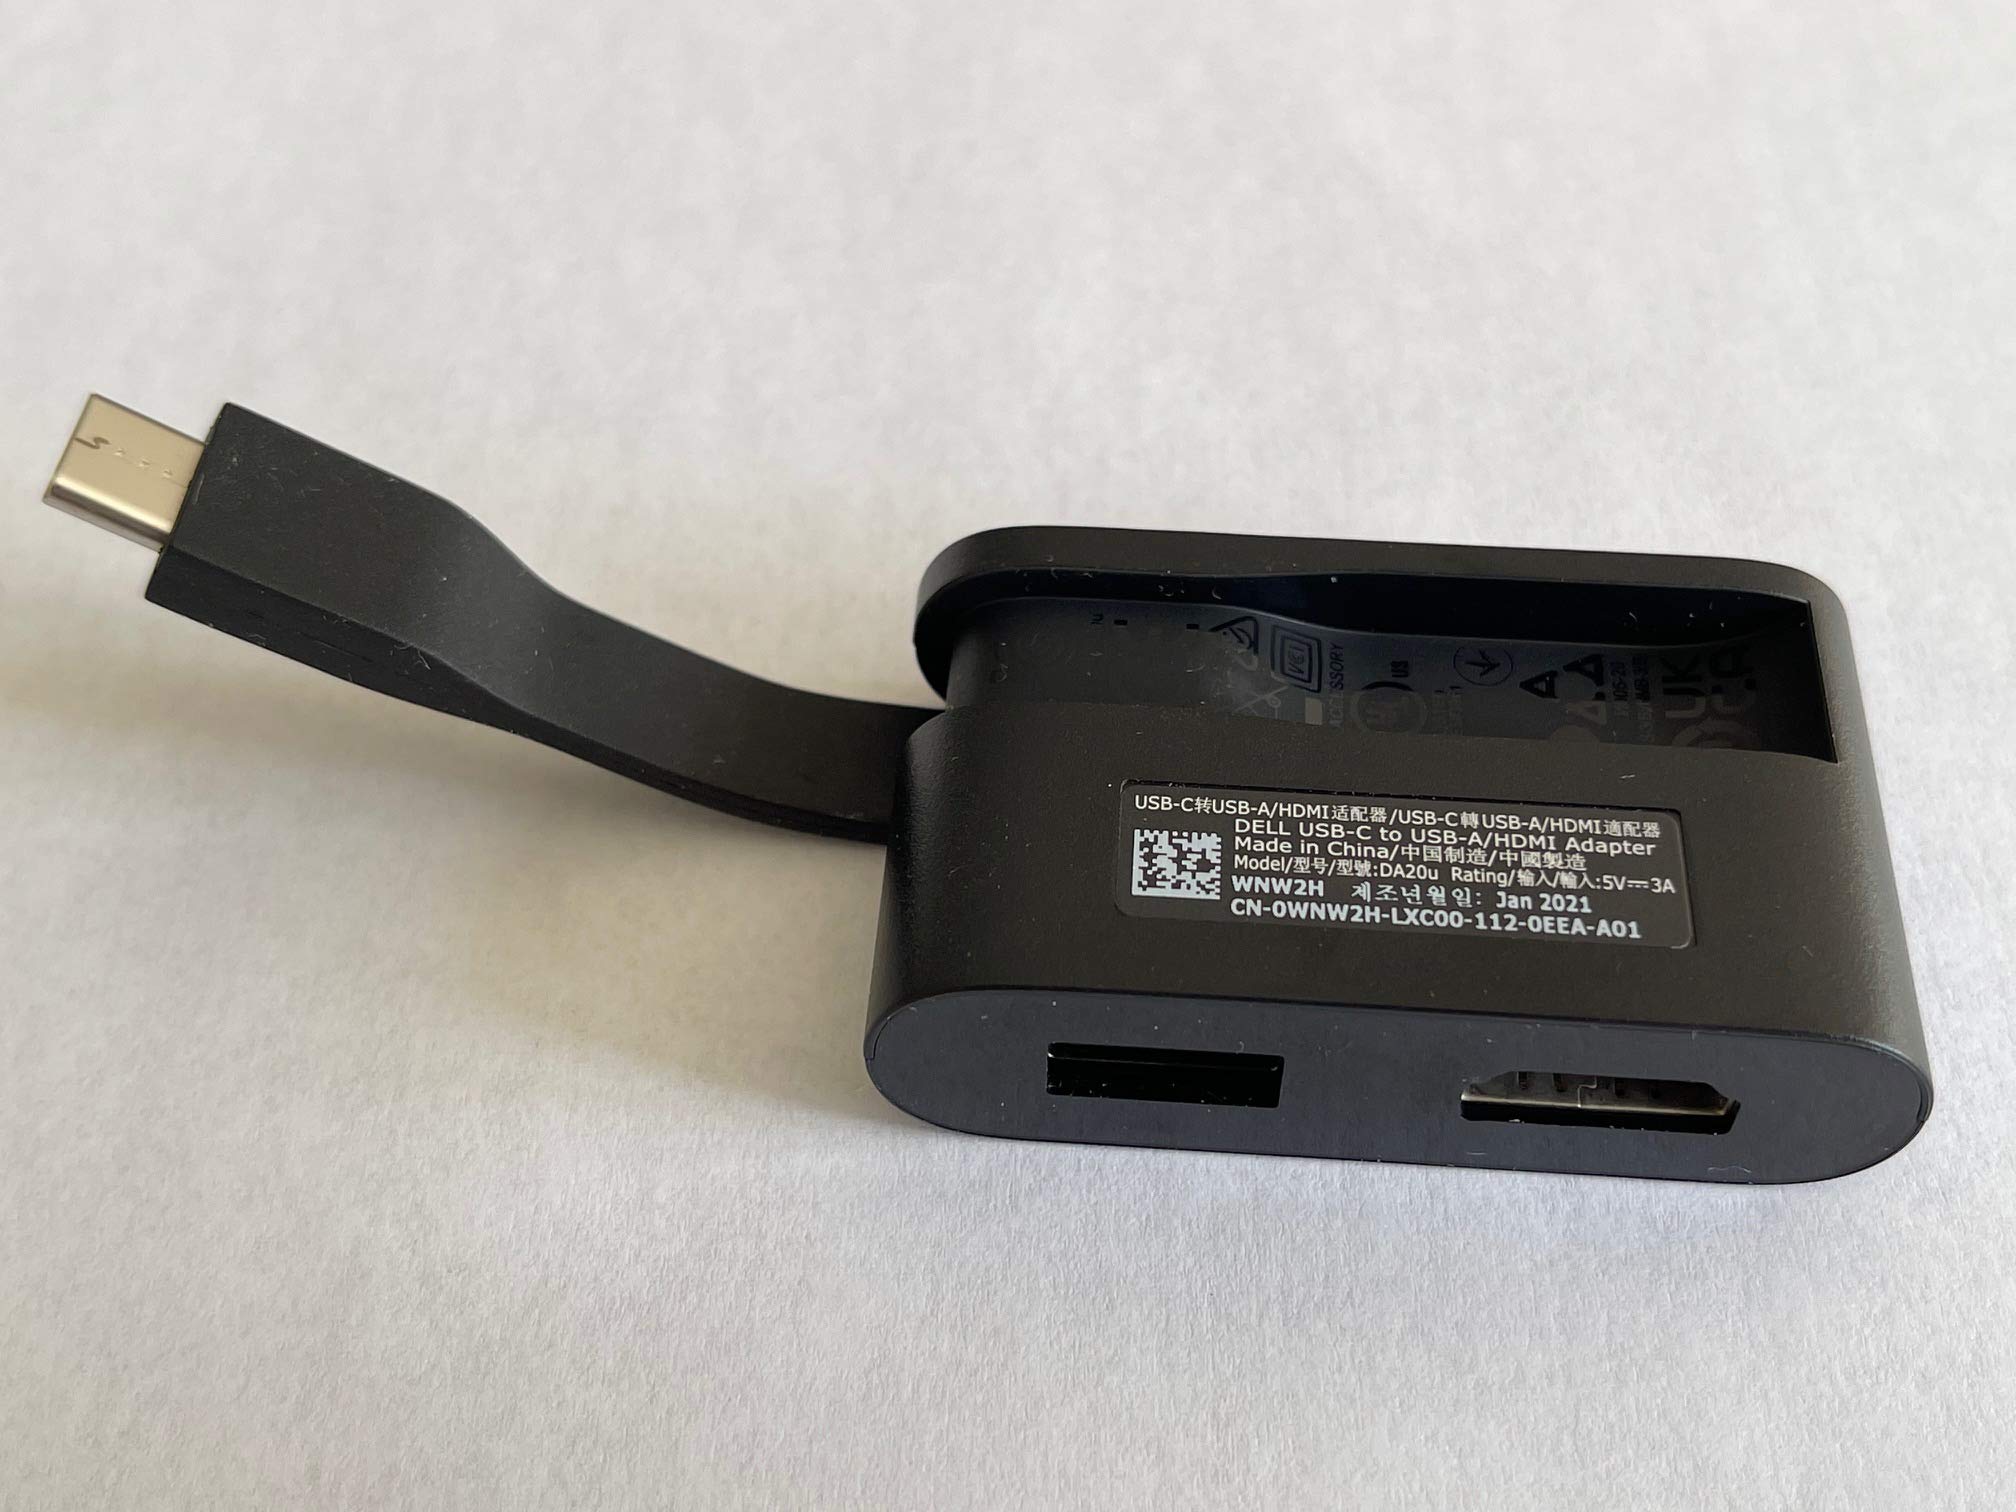 Dell DA20 USB Type-C to HDMI/USB Type-A Adapter Drop in The Box Component for: XPS 15-9500 Laptop XPS 17-9700 Laptop, Precision 5550 Mobile Workstation, Precision 5750 Mobile Workstation